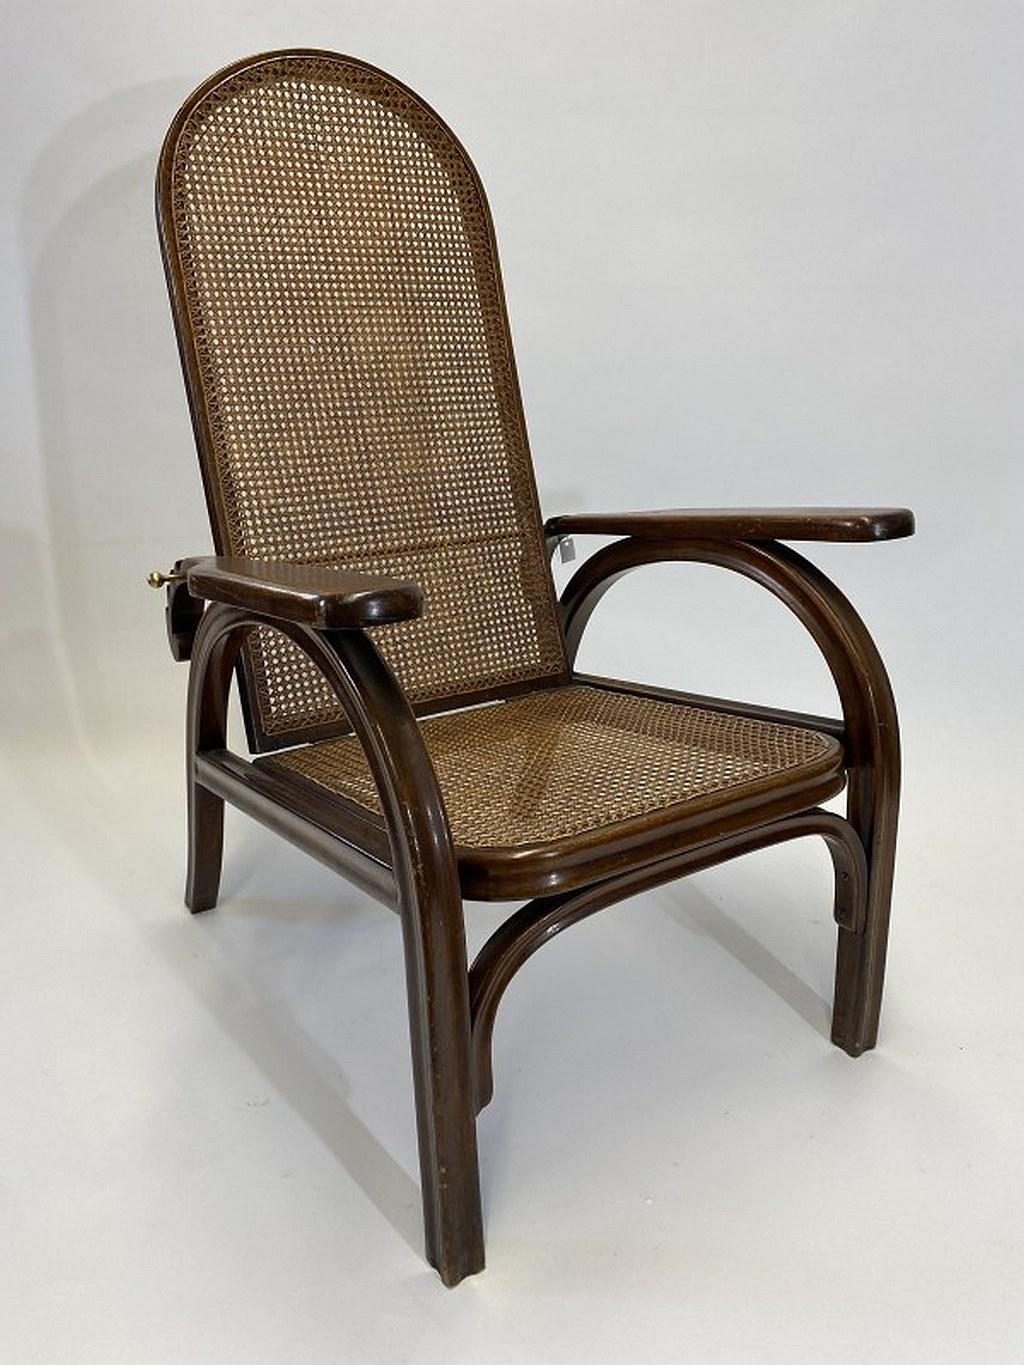 Morris adjustable chair no.6392 by Otto Prutscher for Thonet Austria in very good original condition with signs of usage.